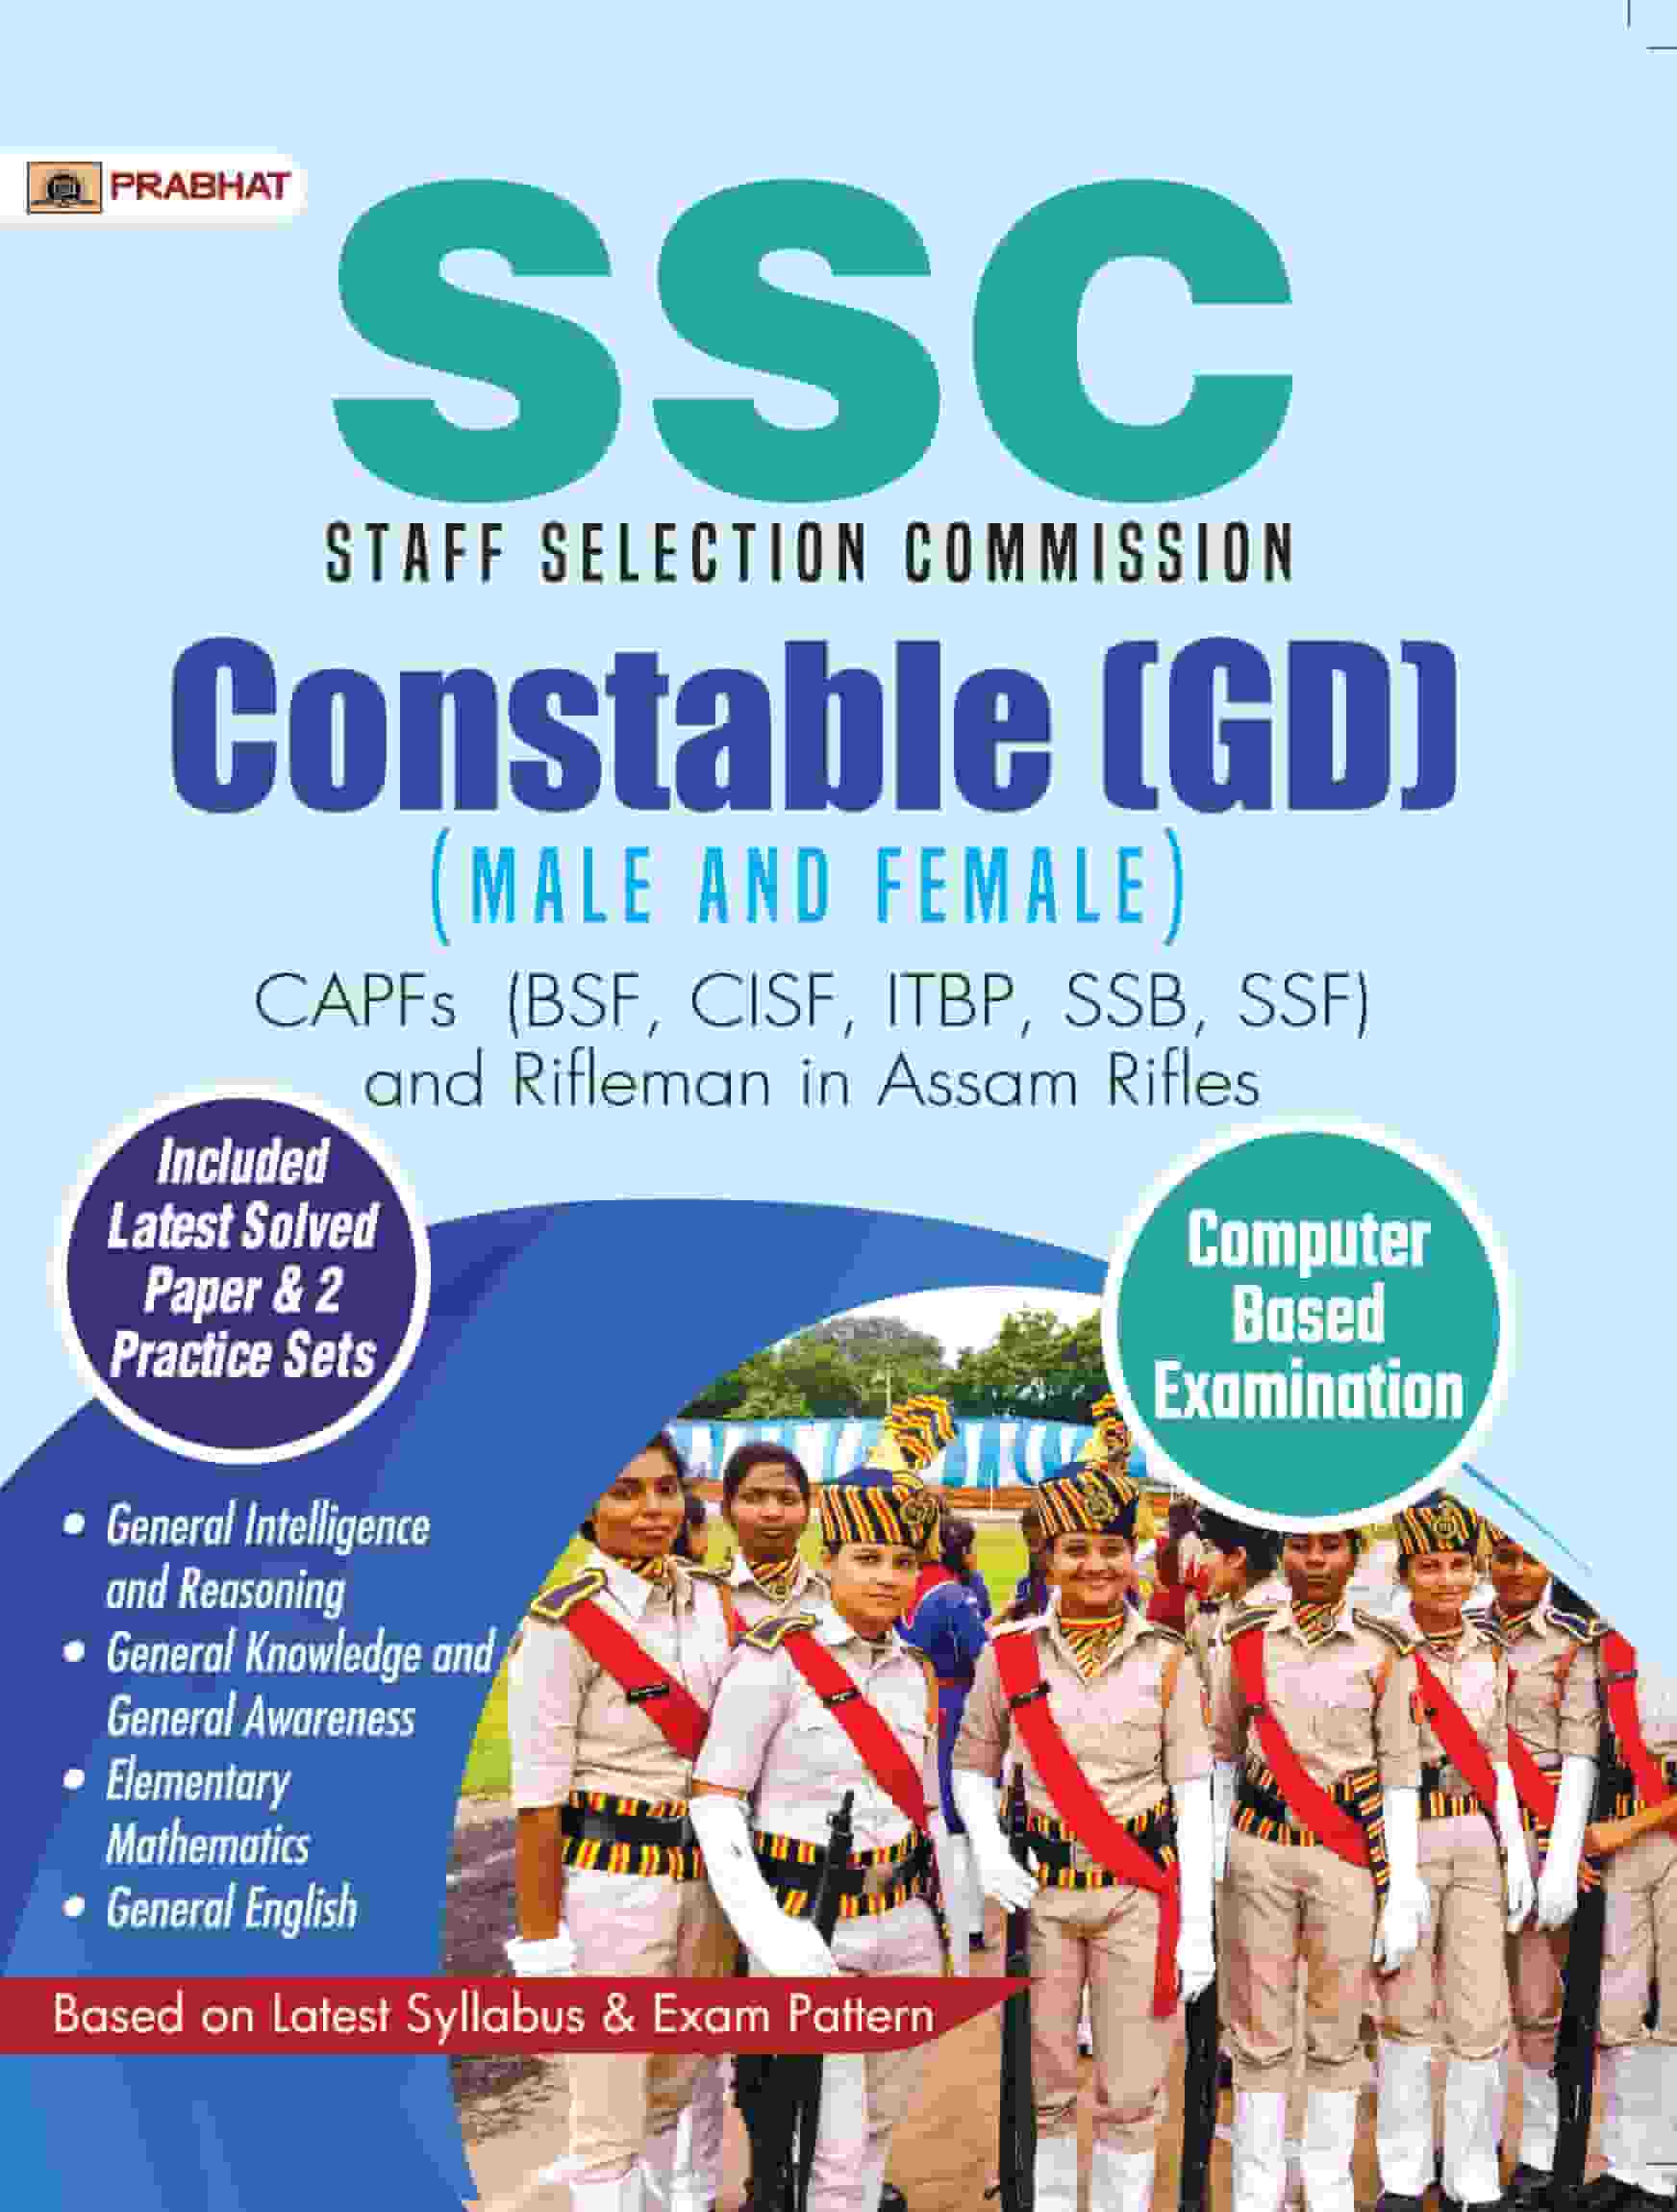 SSC Staff Selection Commission Constable (GD) (Male and Female) Computer Based Examination